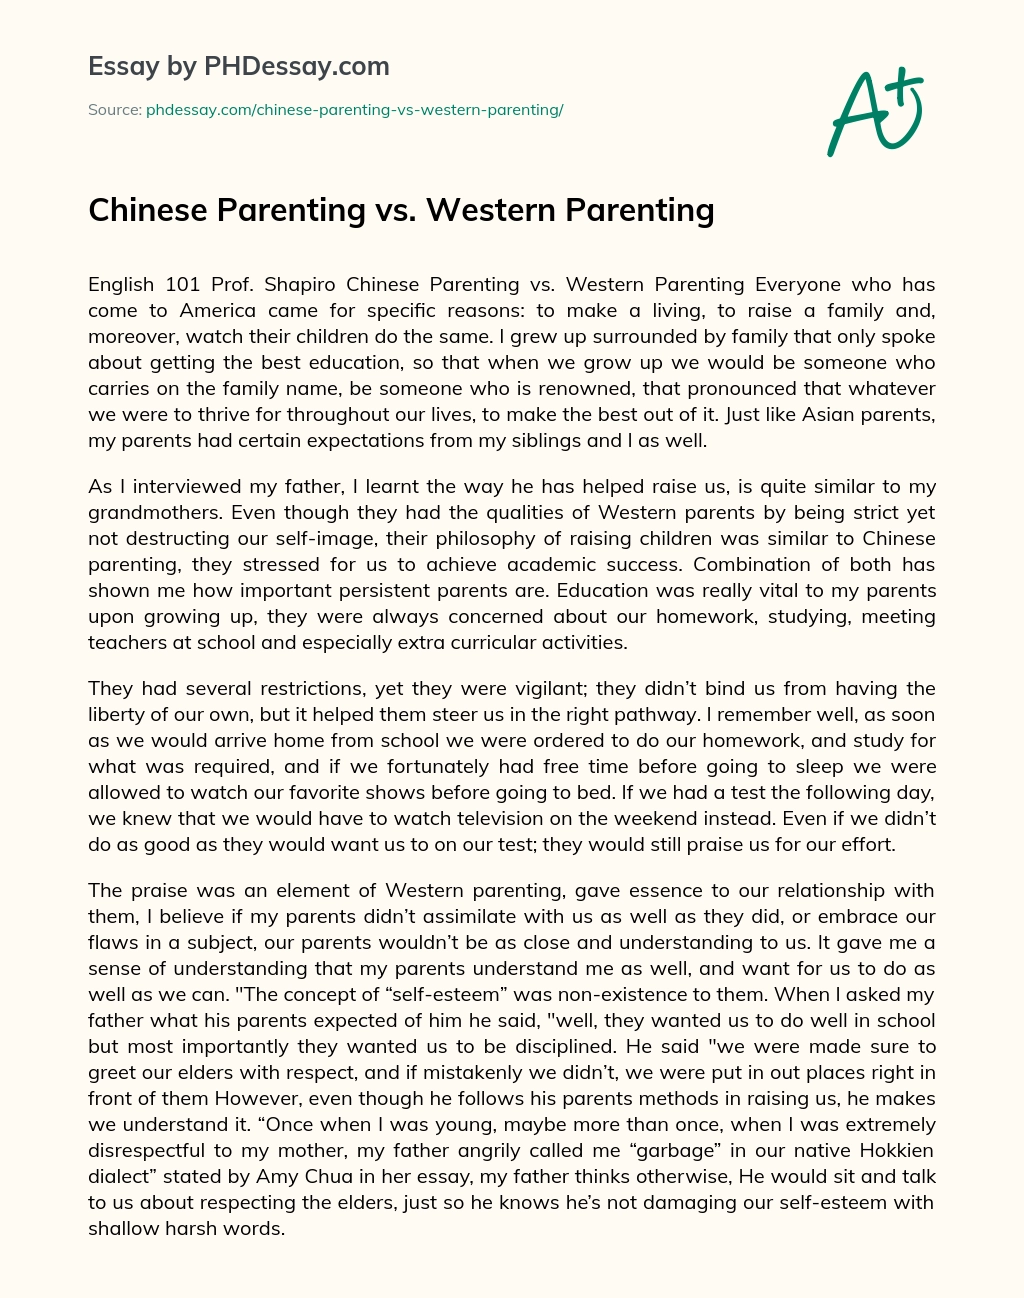 Chinese Parenting vs. Western Parenting essay